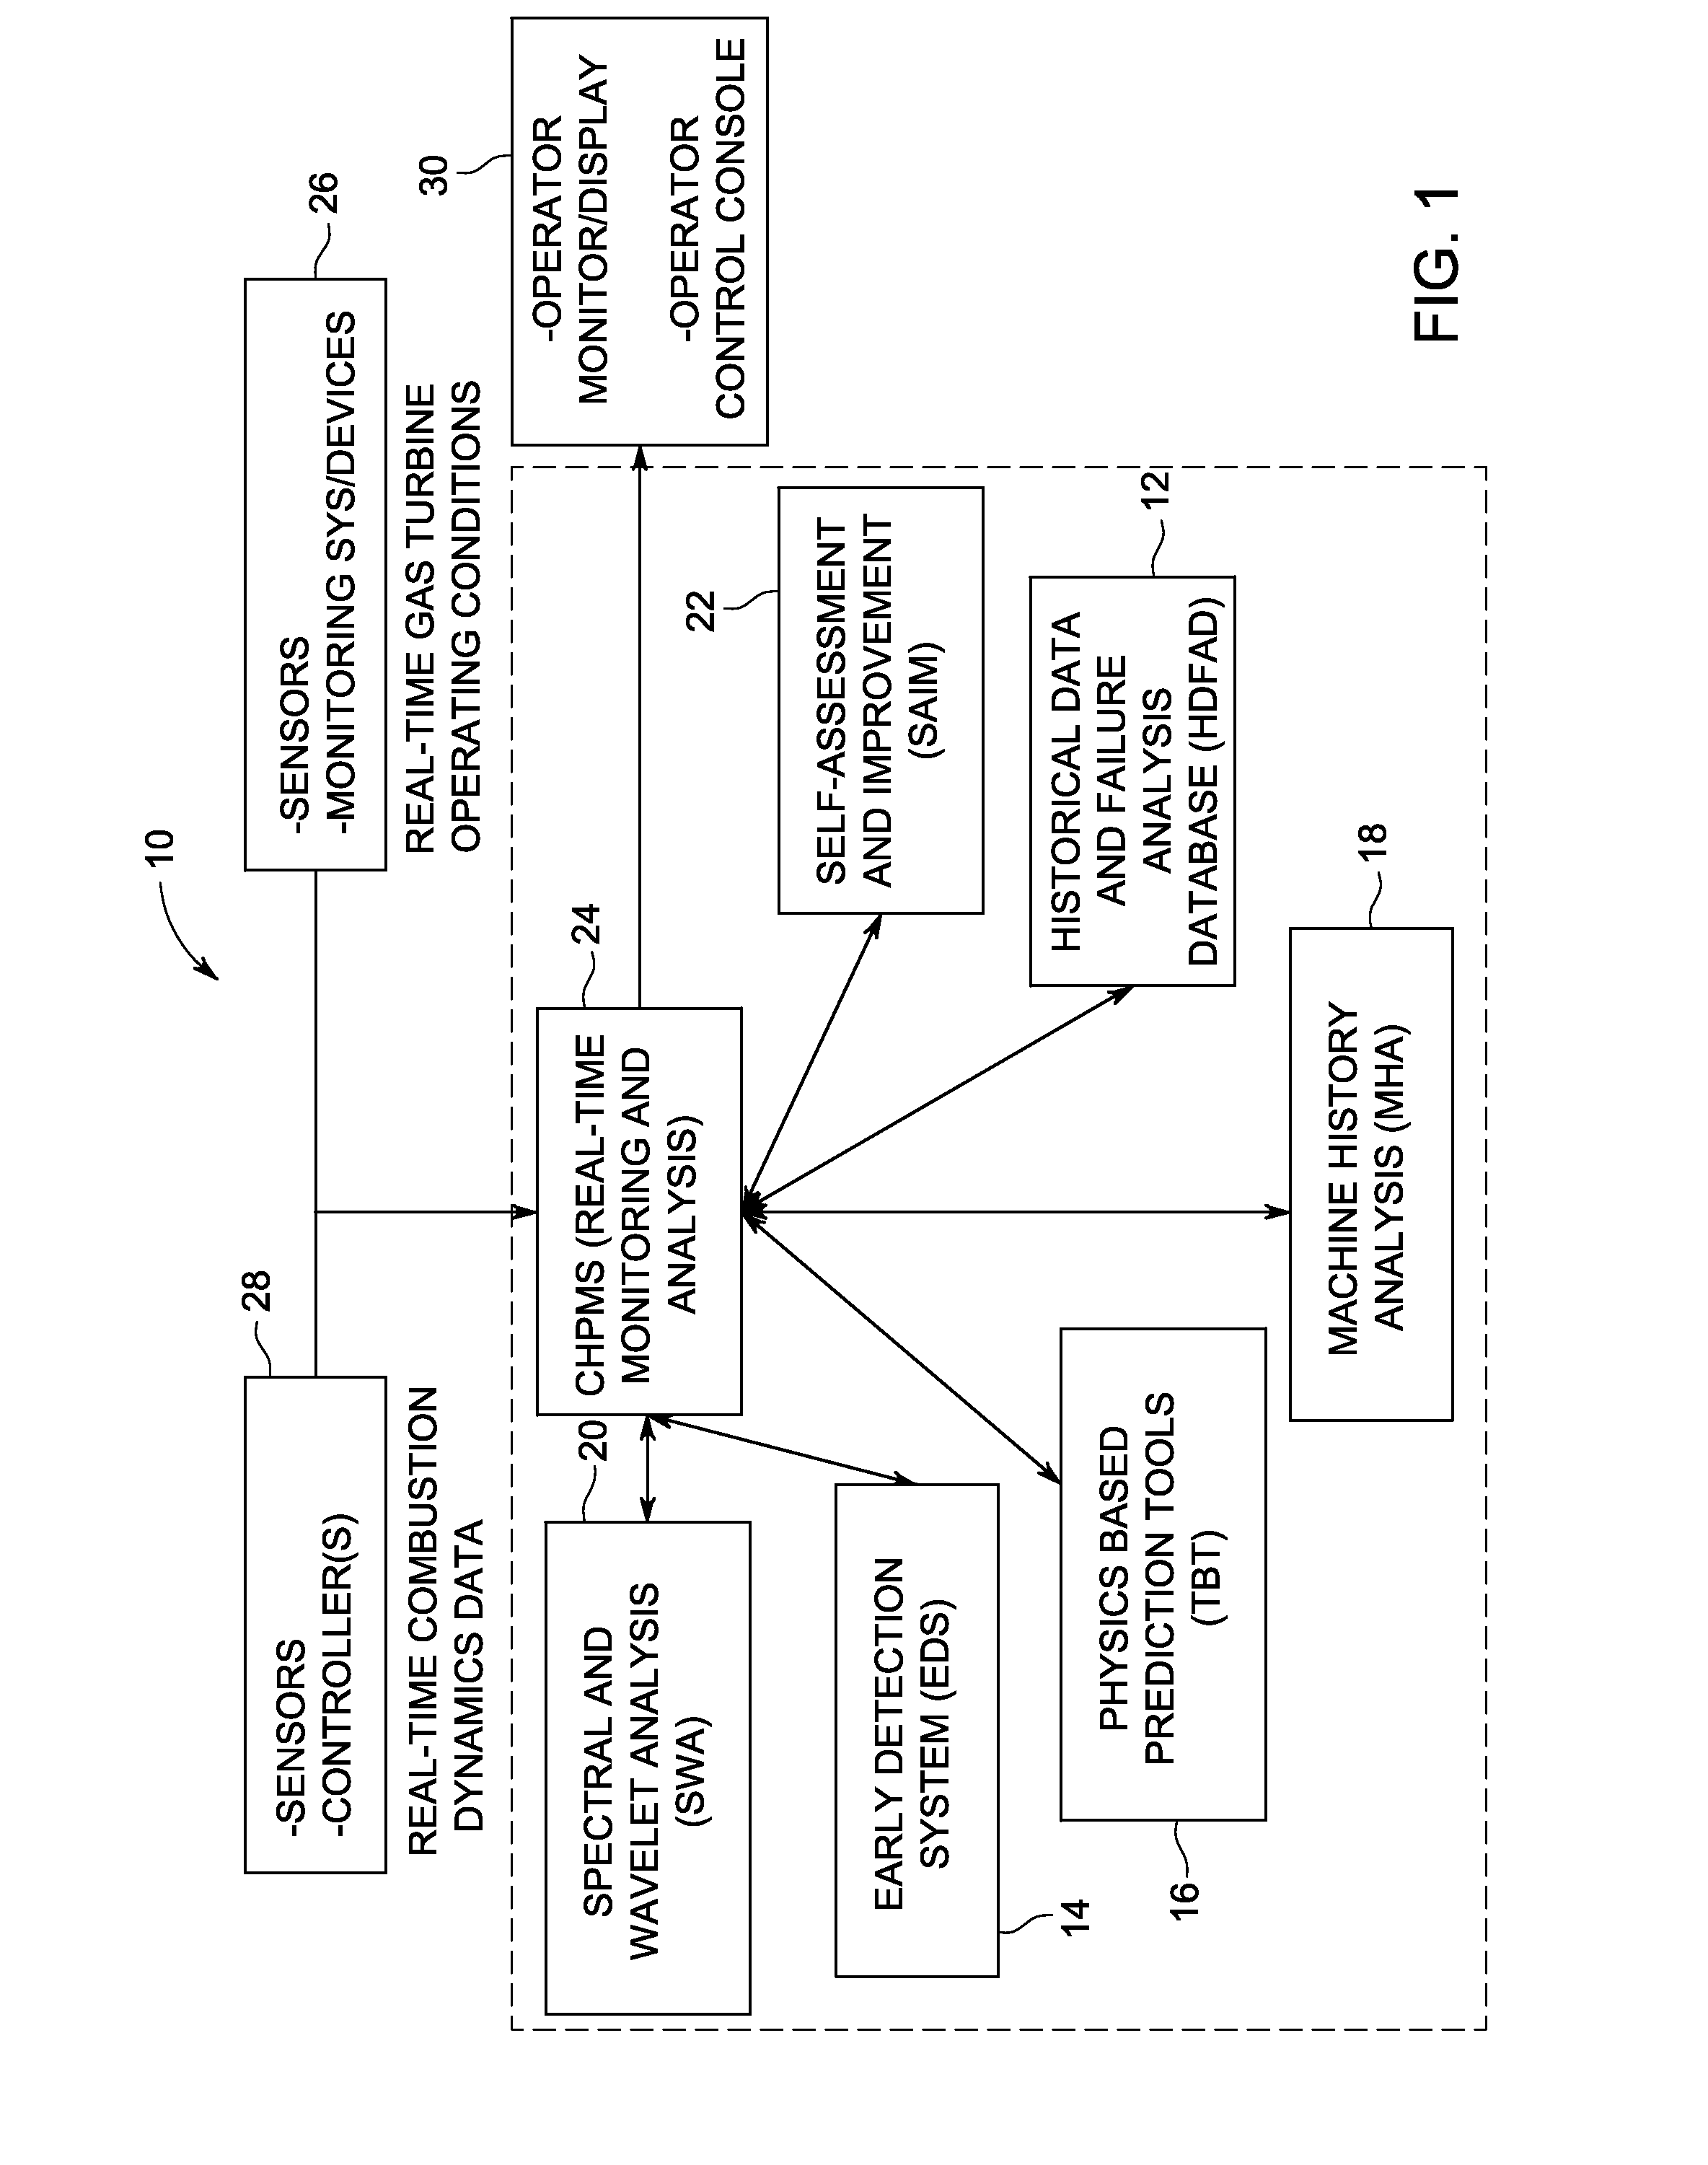 Combustor health and performance monitoring system for gas turbines using combustion dynamics